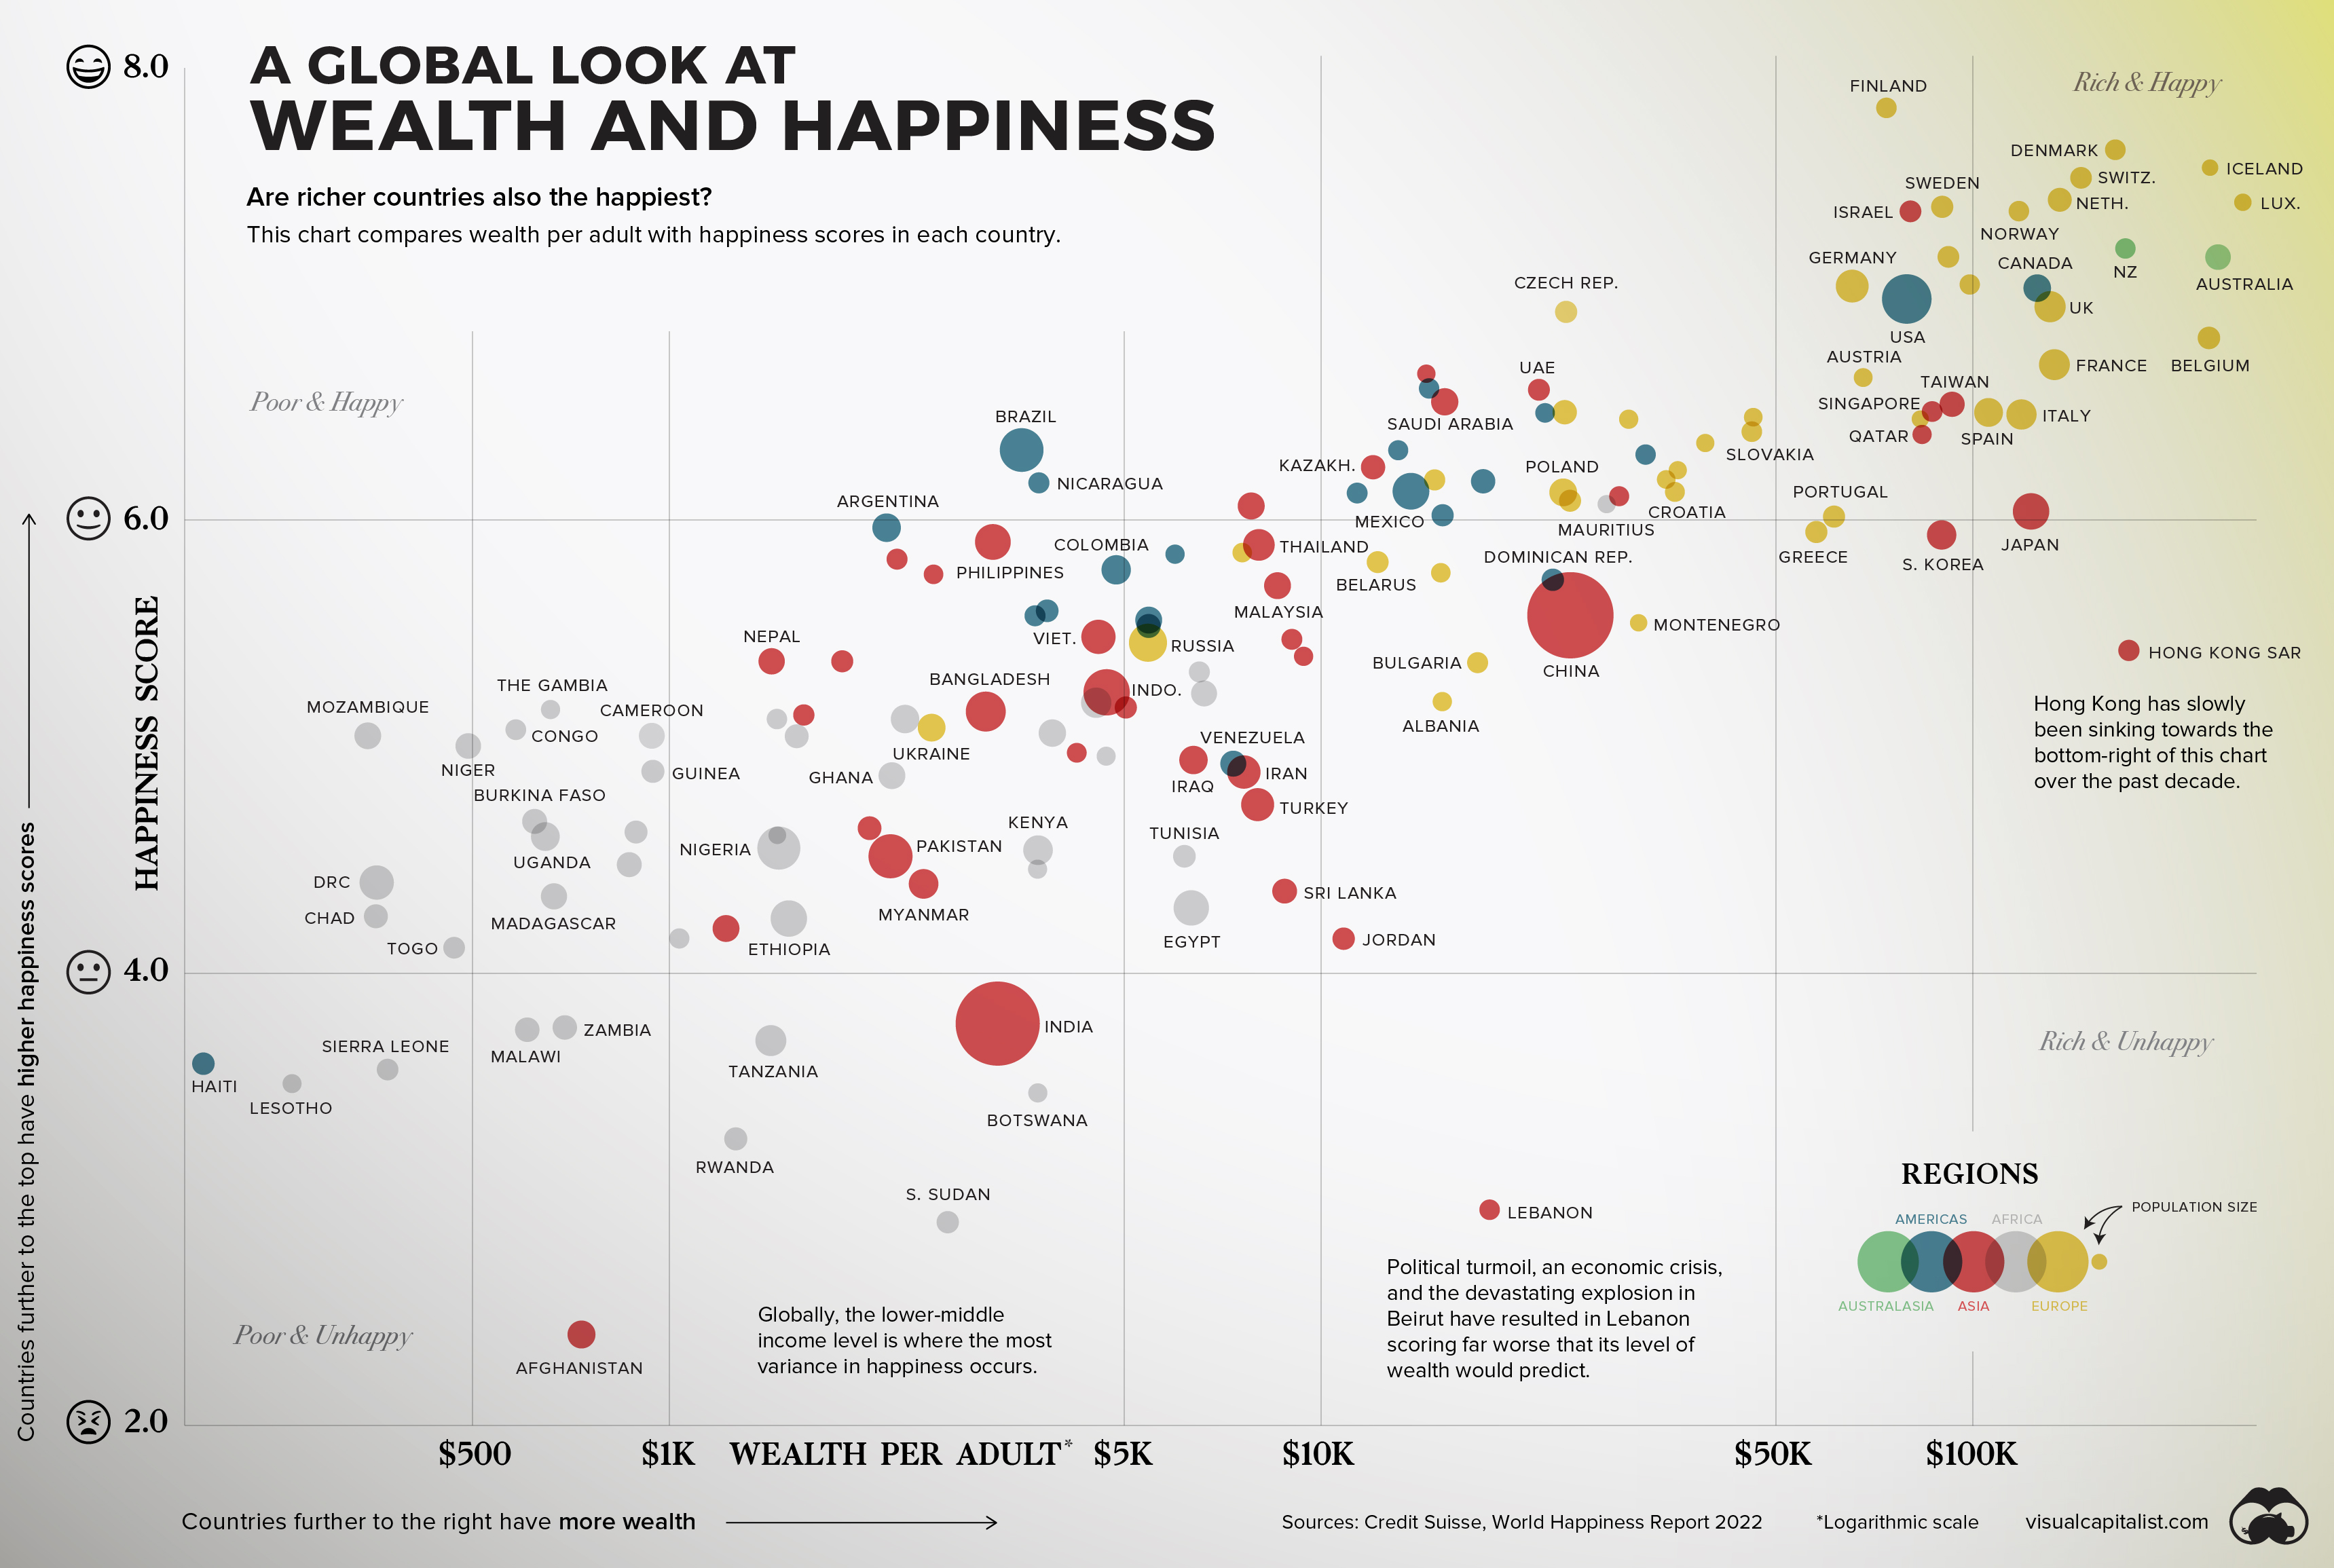 Charting the Relationship Between Wealth and Happiness, by Country